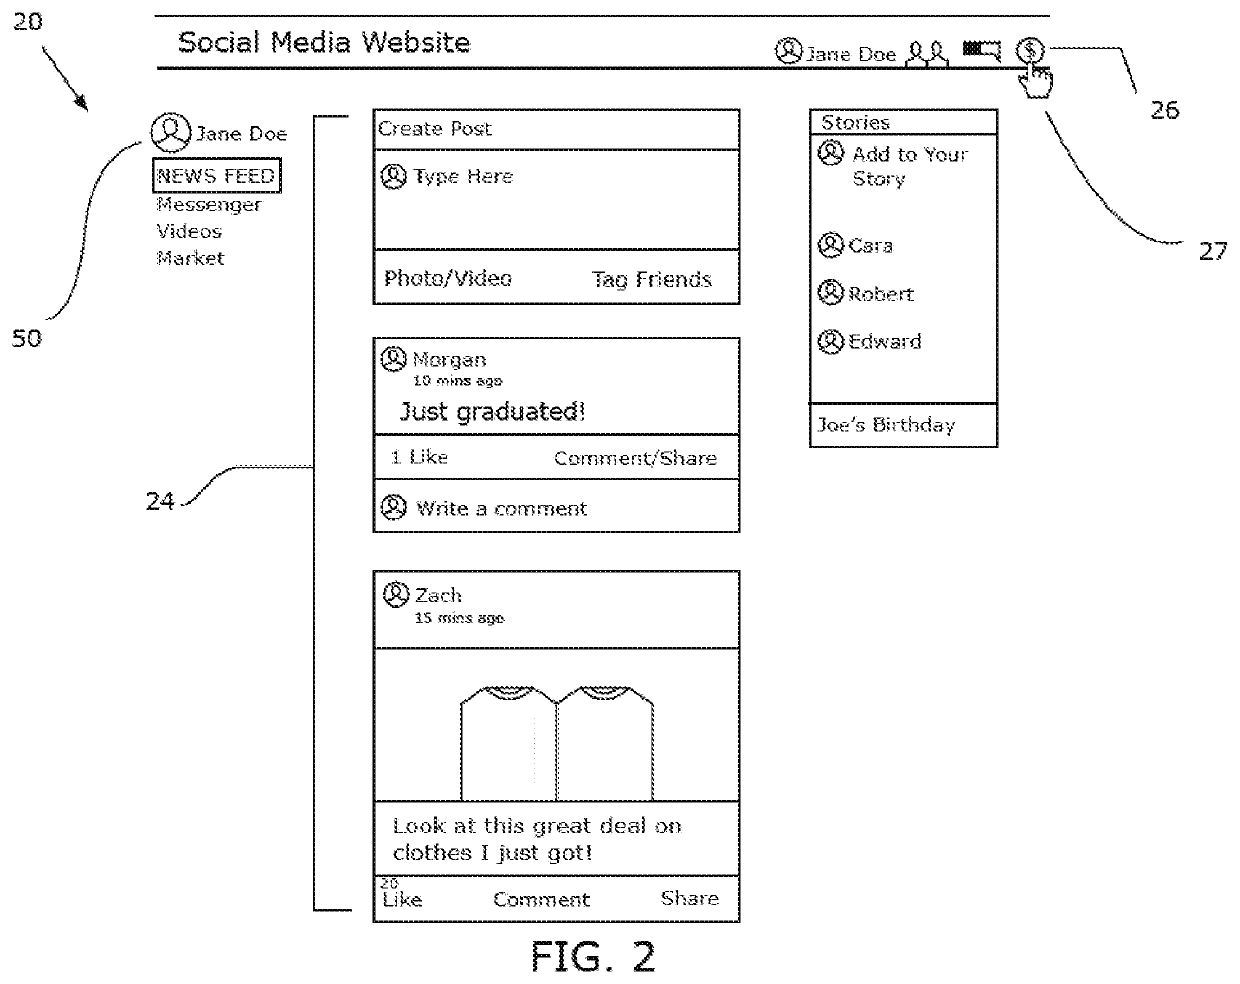 System and Method for Providing Opt-In Digital Marketing